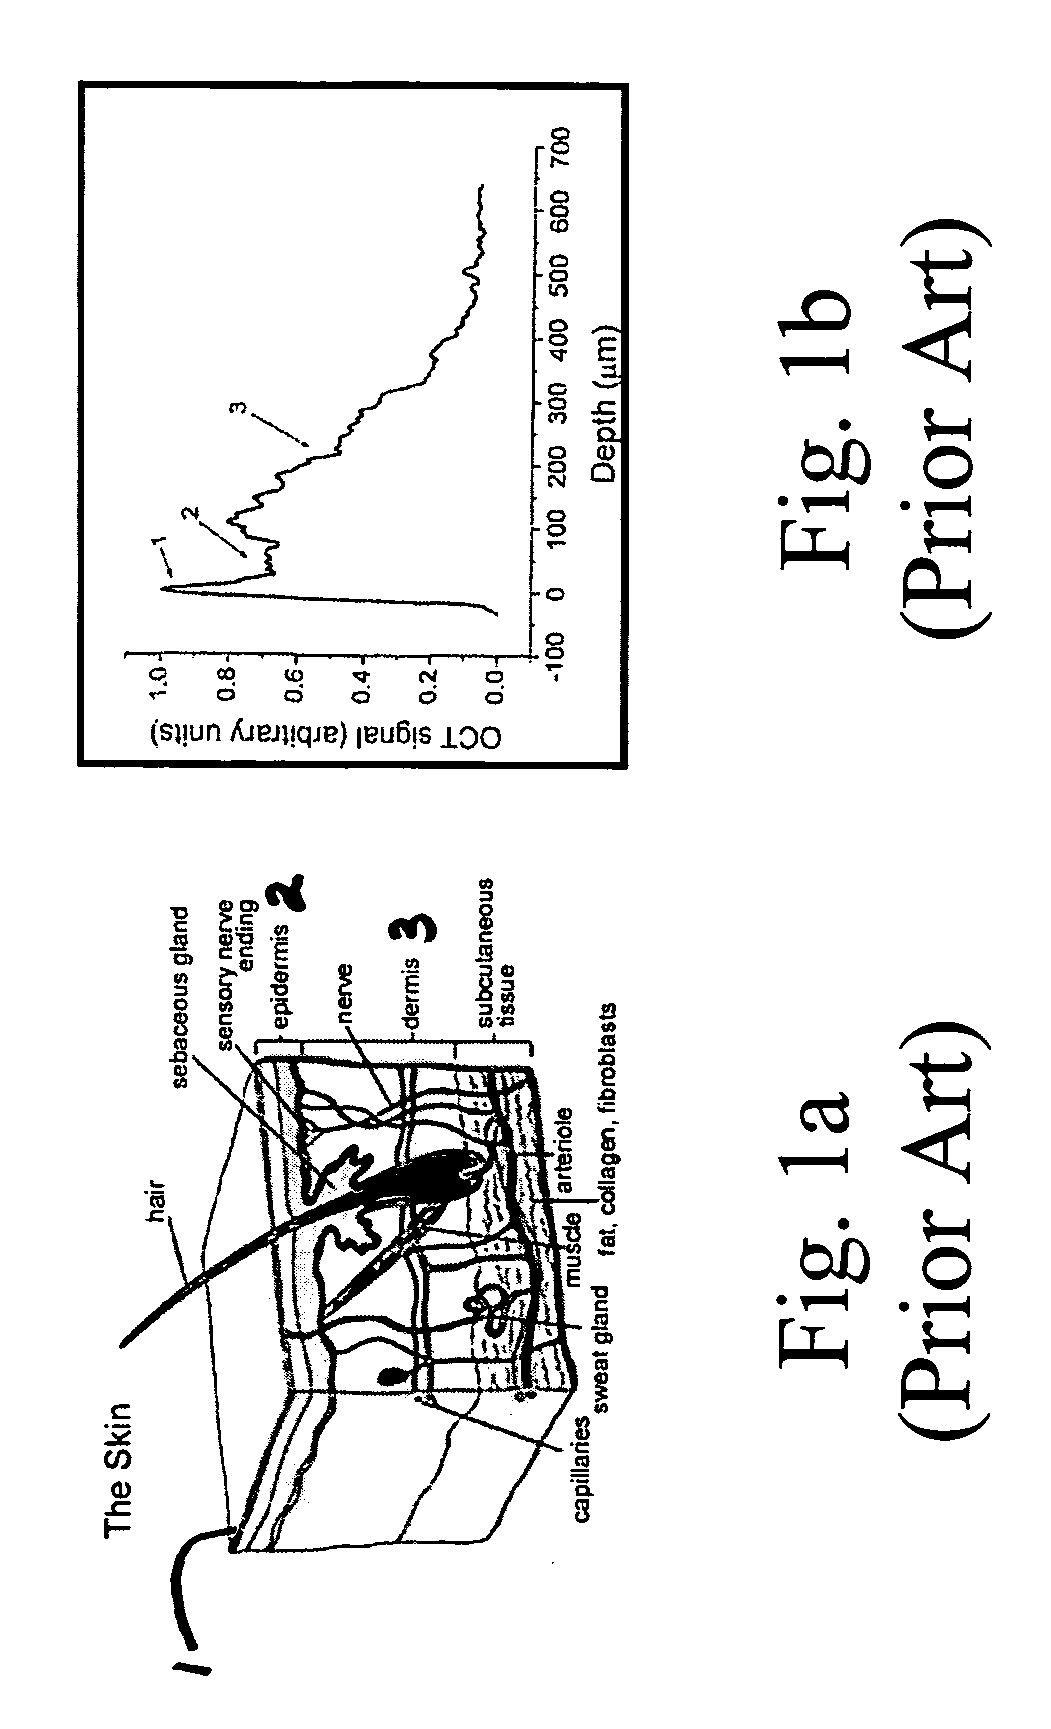 Method and apparatus for monitoring glucose levels in a biological tissue